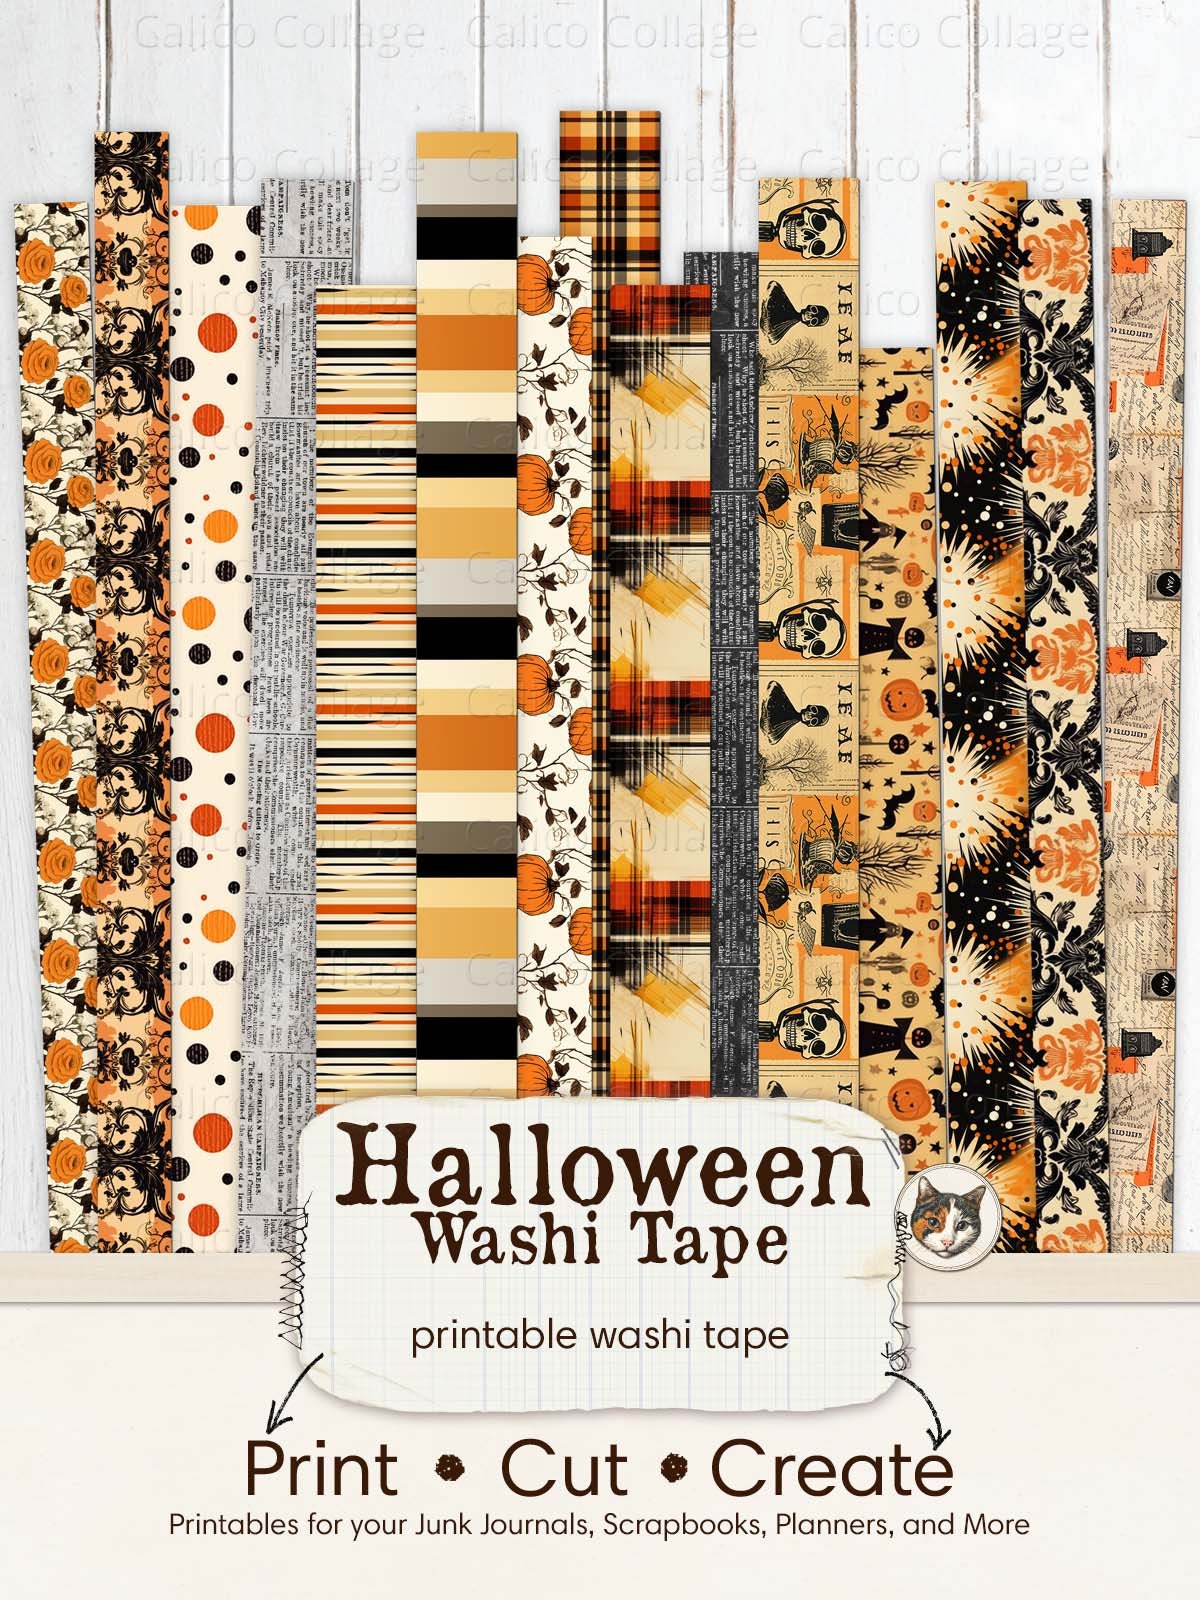 Faux Washi Tape 2 DIGITAL Download Printable Collage Sheet for